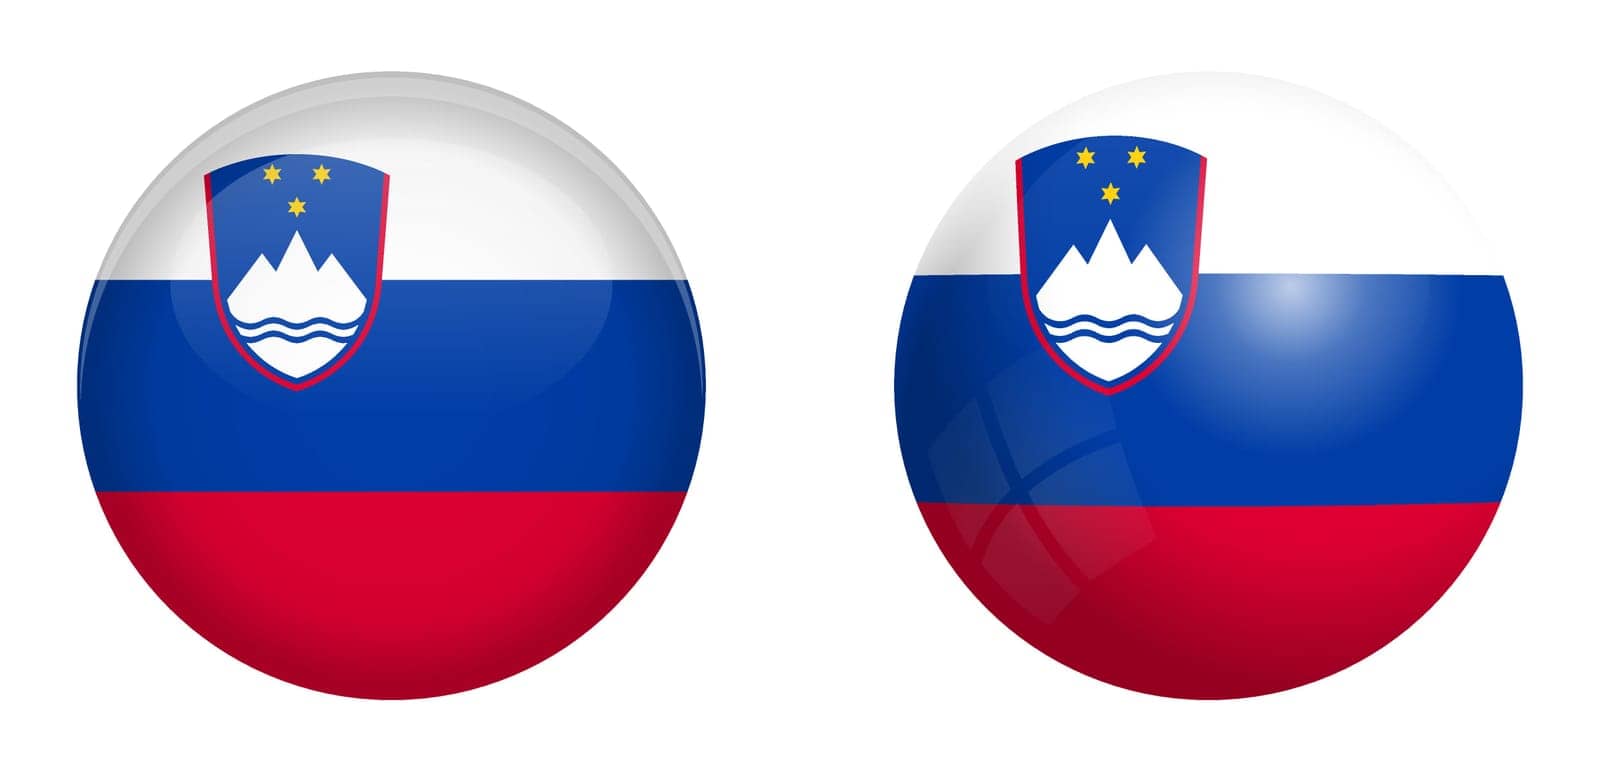 Slovenia flag under 3d dome button and on glossy sphere / ball.